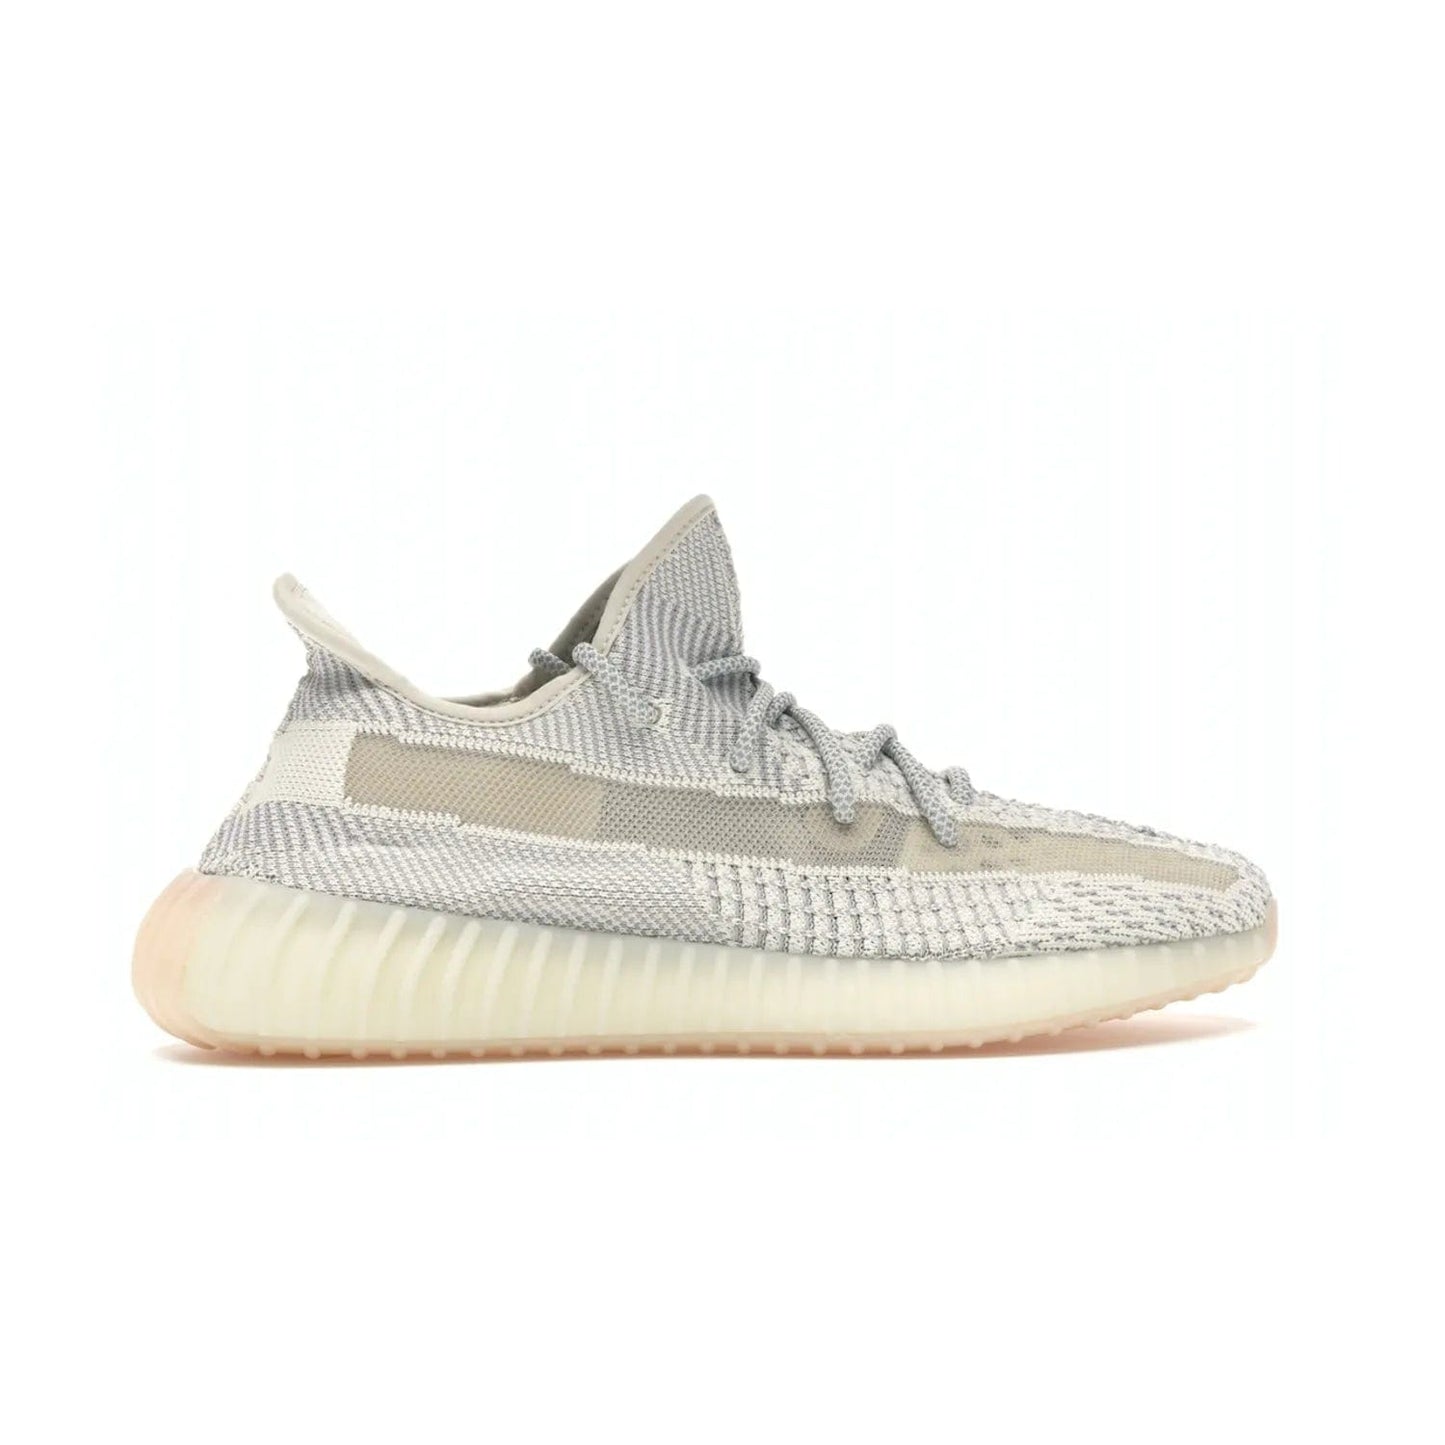 adidas Yeezy Boost 350 V2 Lundmark (Non Reflective) - Image 36 - Only at www.BallersClubKickz.com - Shop the exclusive adidas Yeezy Boost 350 V2 Lundmark with a subtle summer color, mesh upper, white-to-cream transitional midsole, light tan outsole, and pink middle stripe. Comfort and style come together in this perfect summer 350 V2. Released on July 11, 2019.